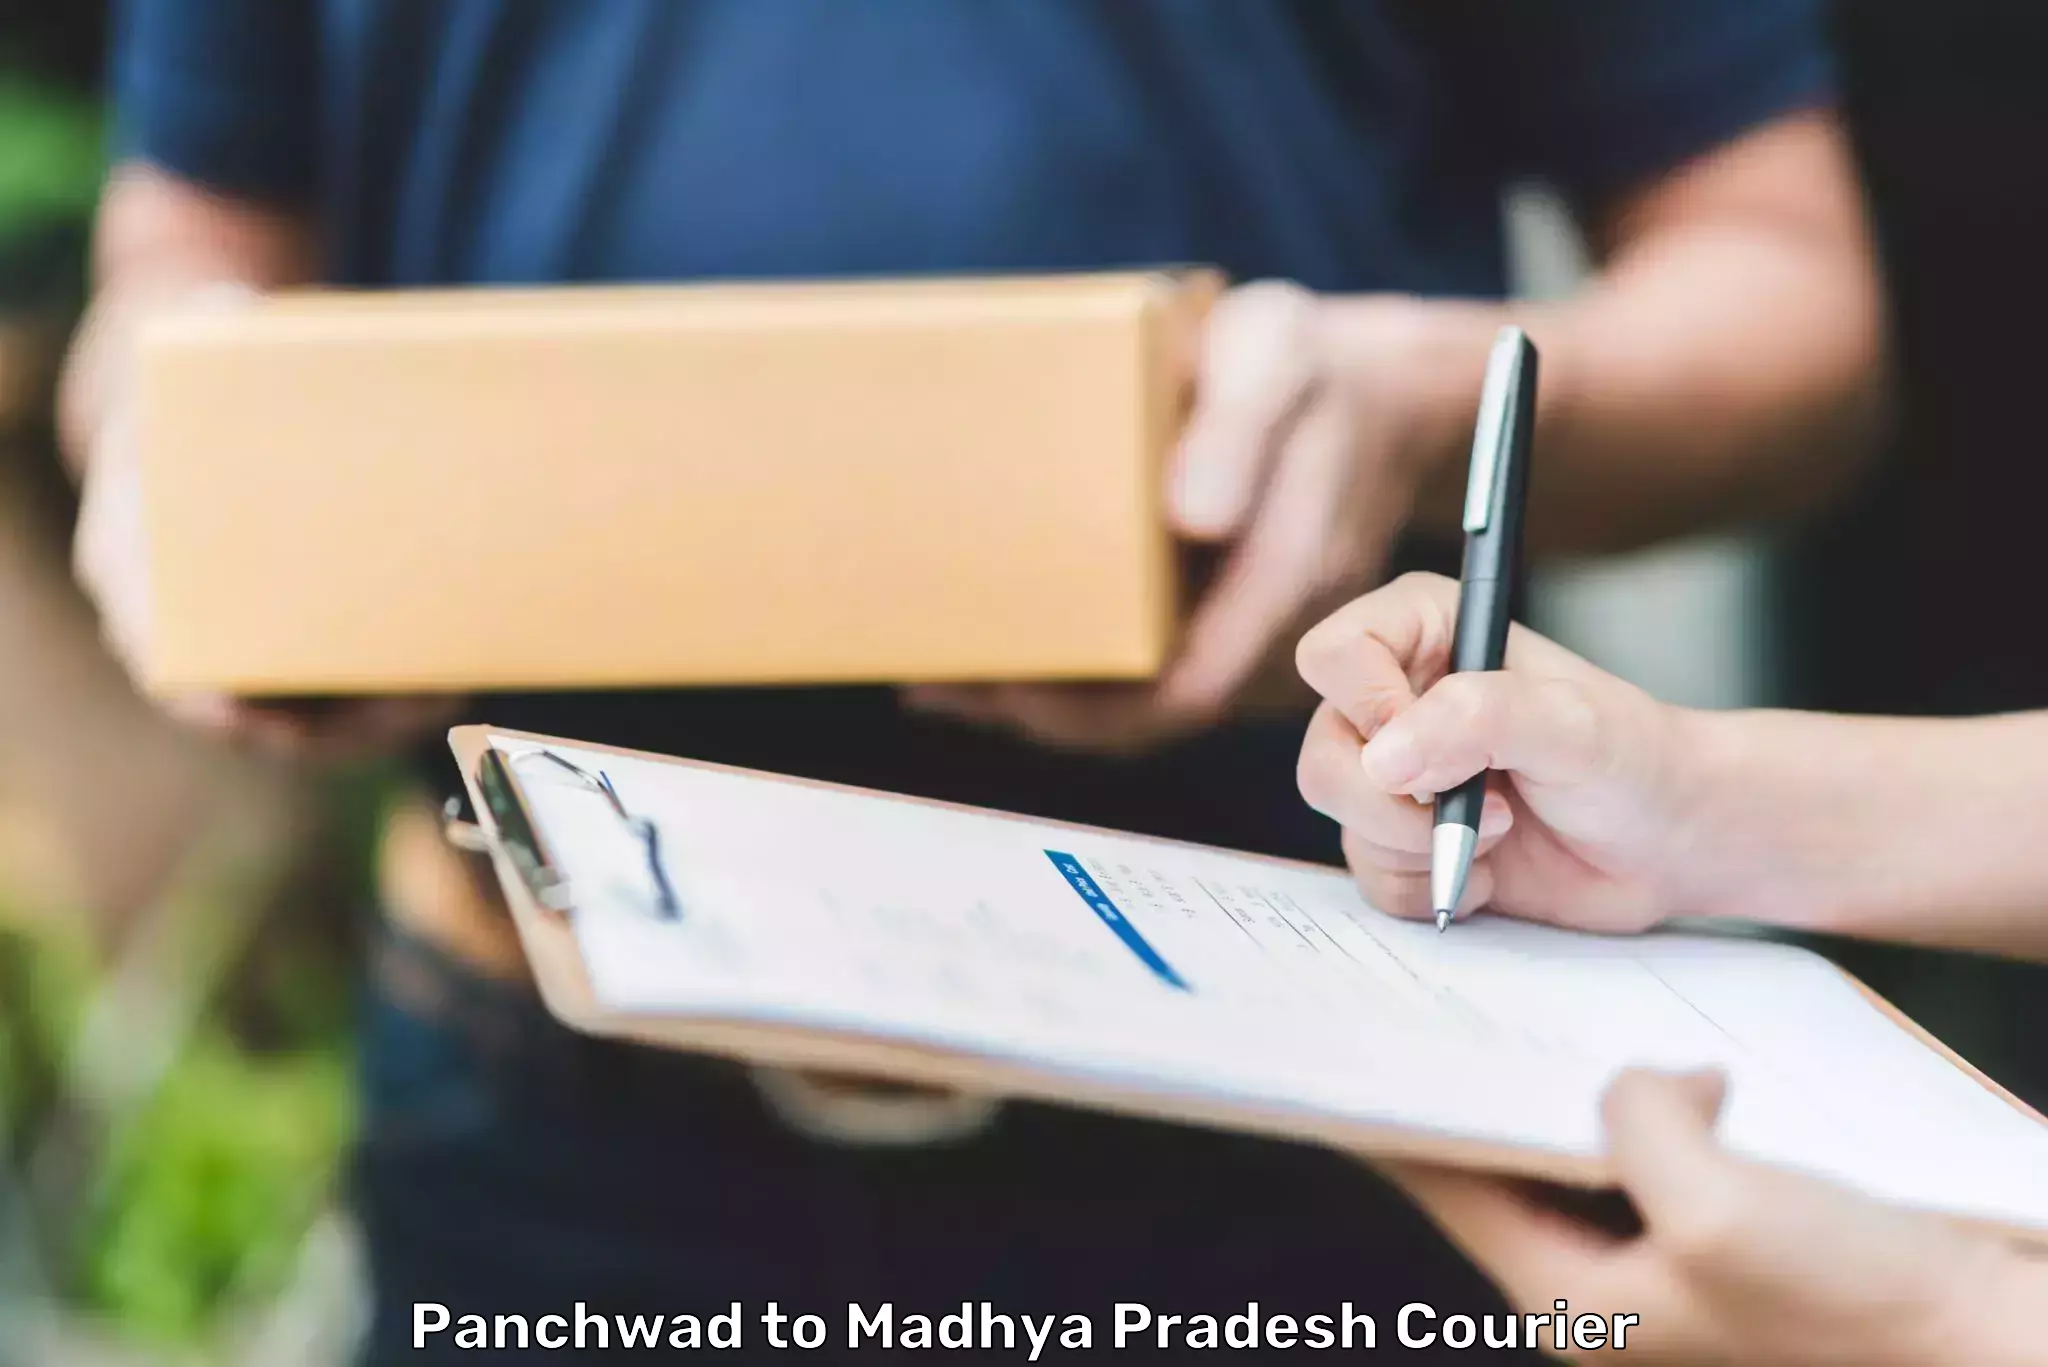 Courier service booking Panchwad to Jabalpur